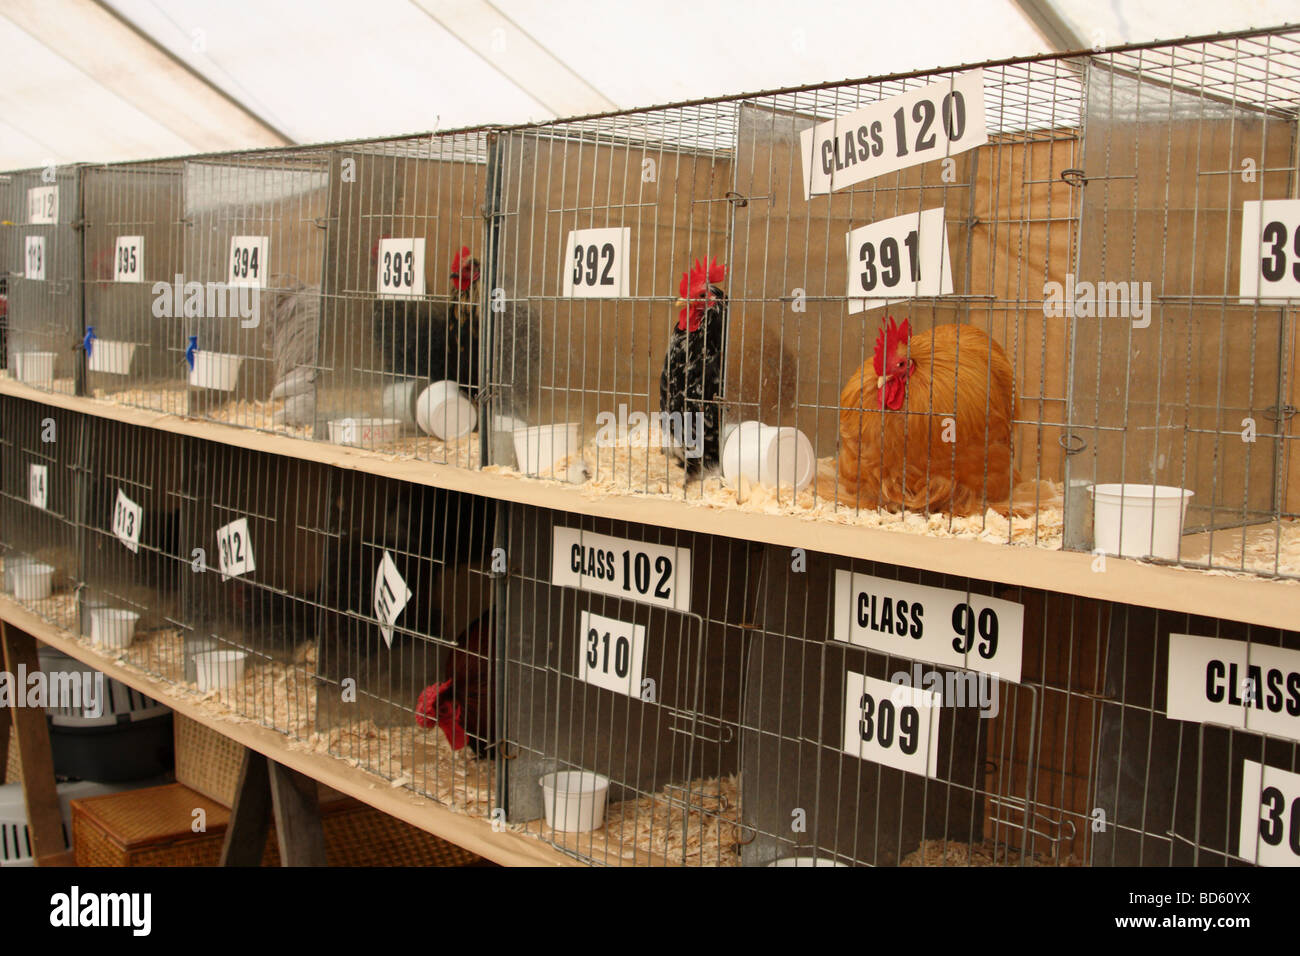 Poultry in cages at the Bakewell Show, Bakewell, Derbyshire, England, U.K. Stock Photo